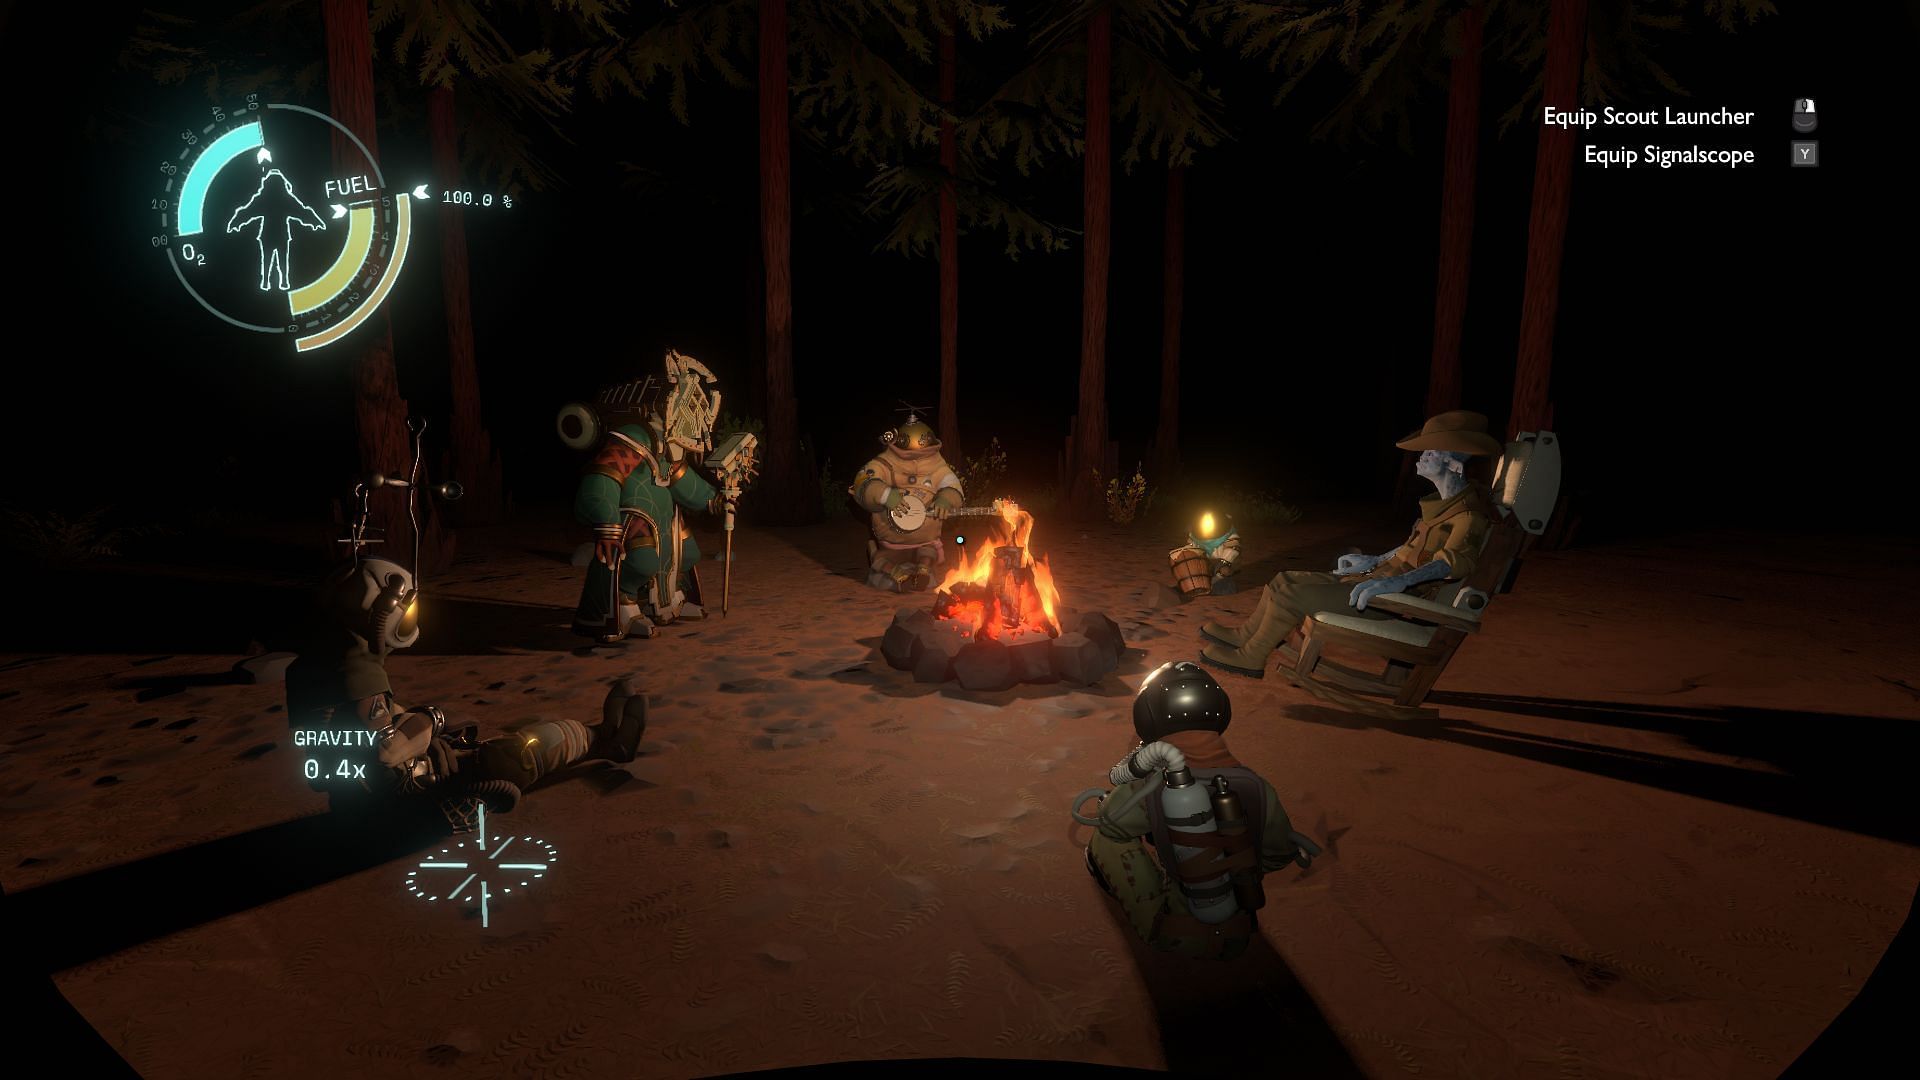 Getting together at the very end (Image via Outer Wilds)